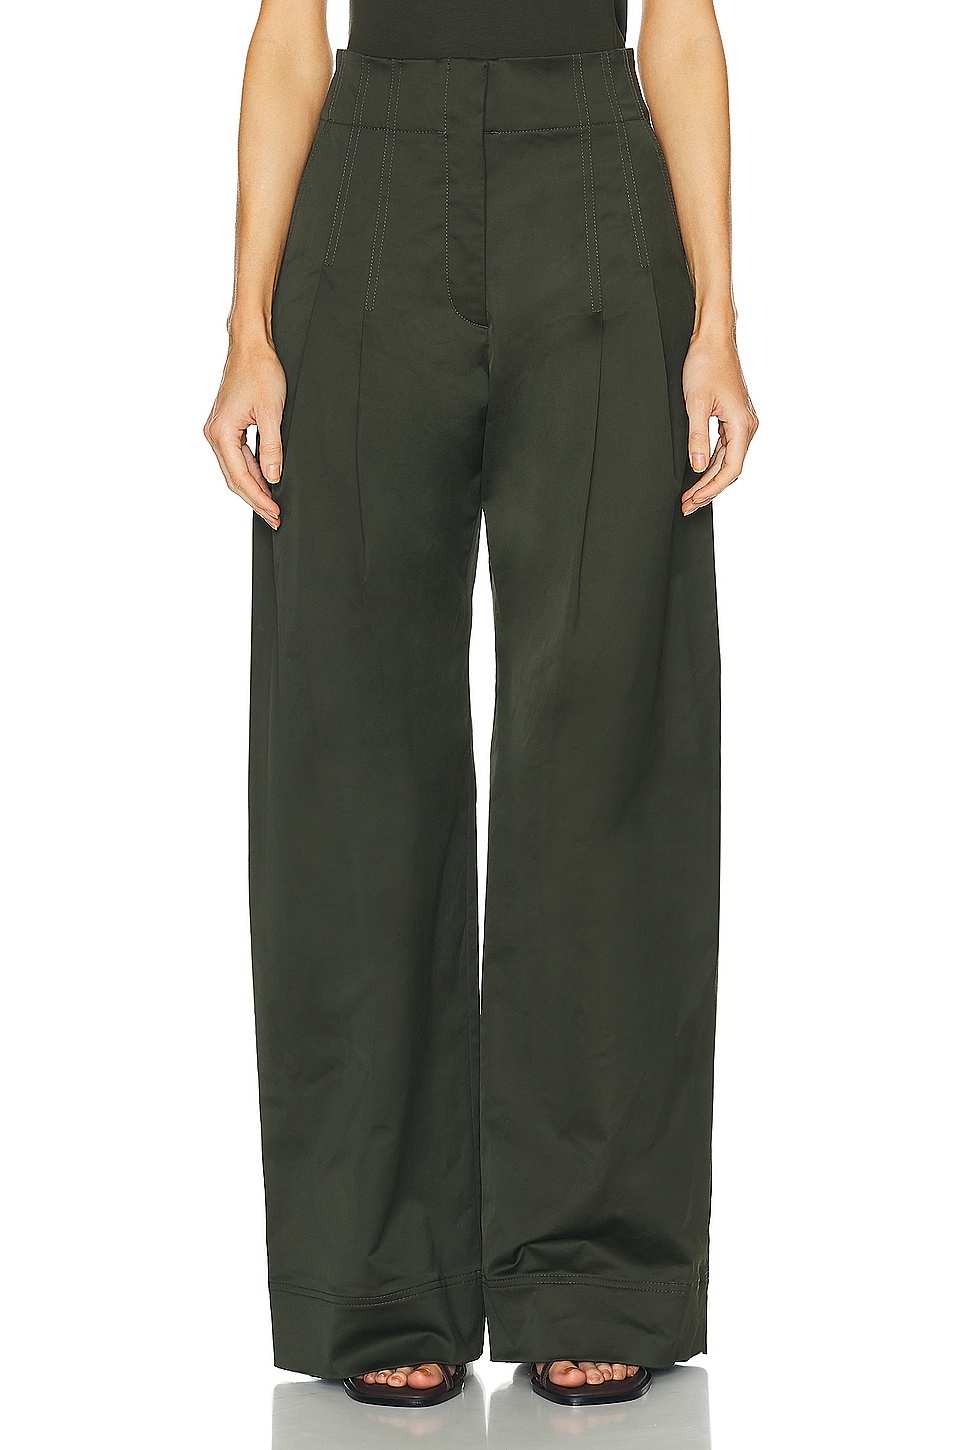 Image 1 of A.L.C. Bennett Pant in Mossy